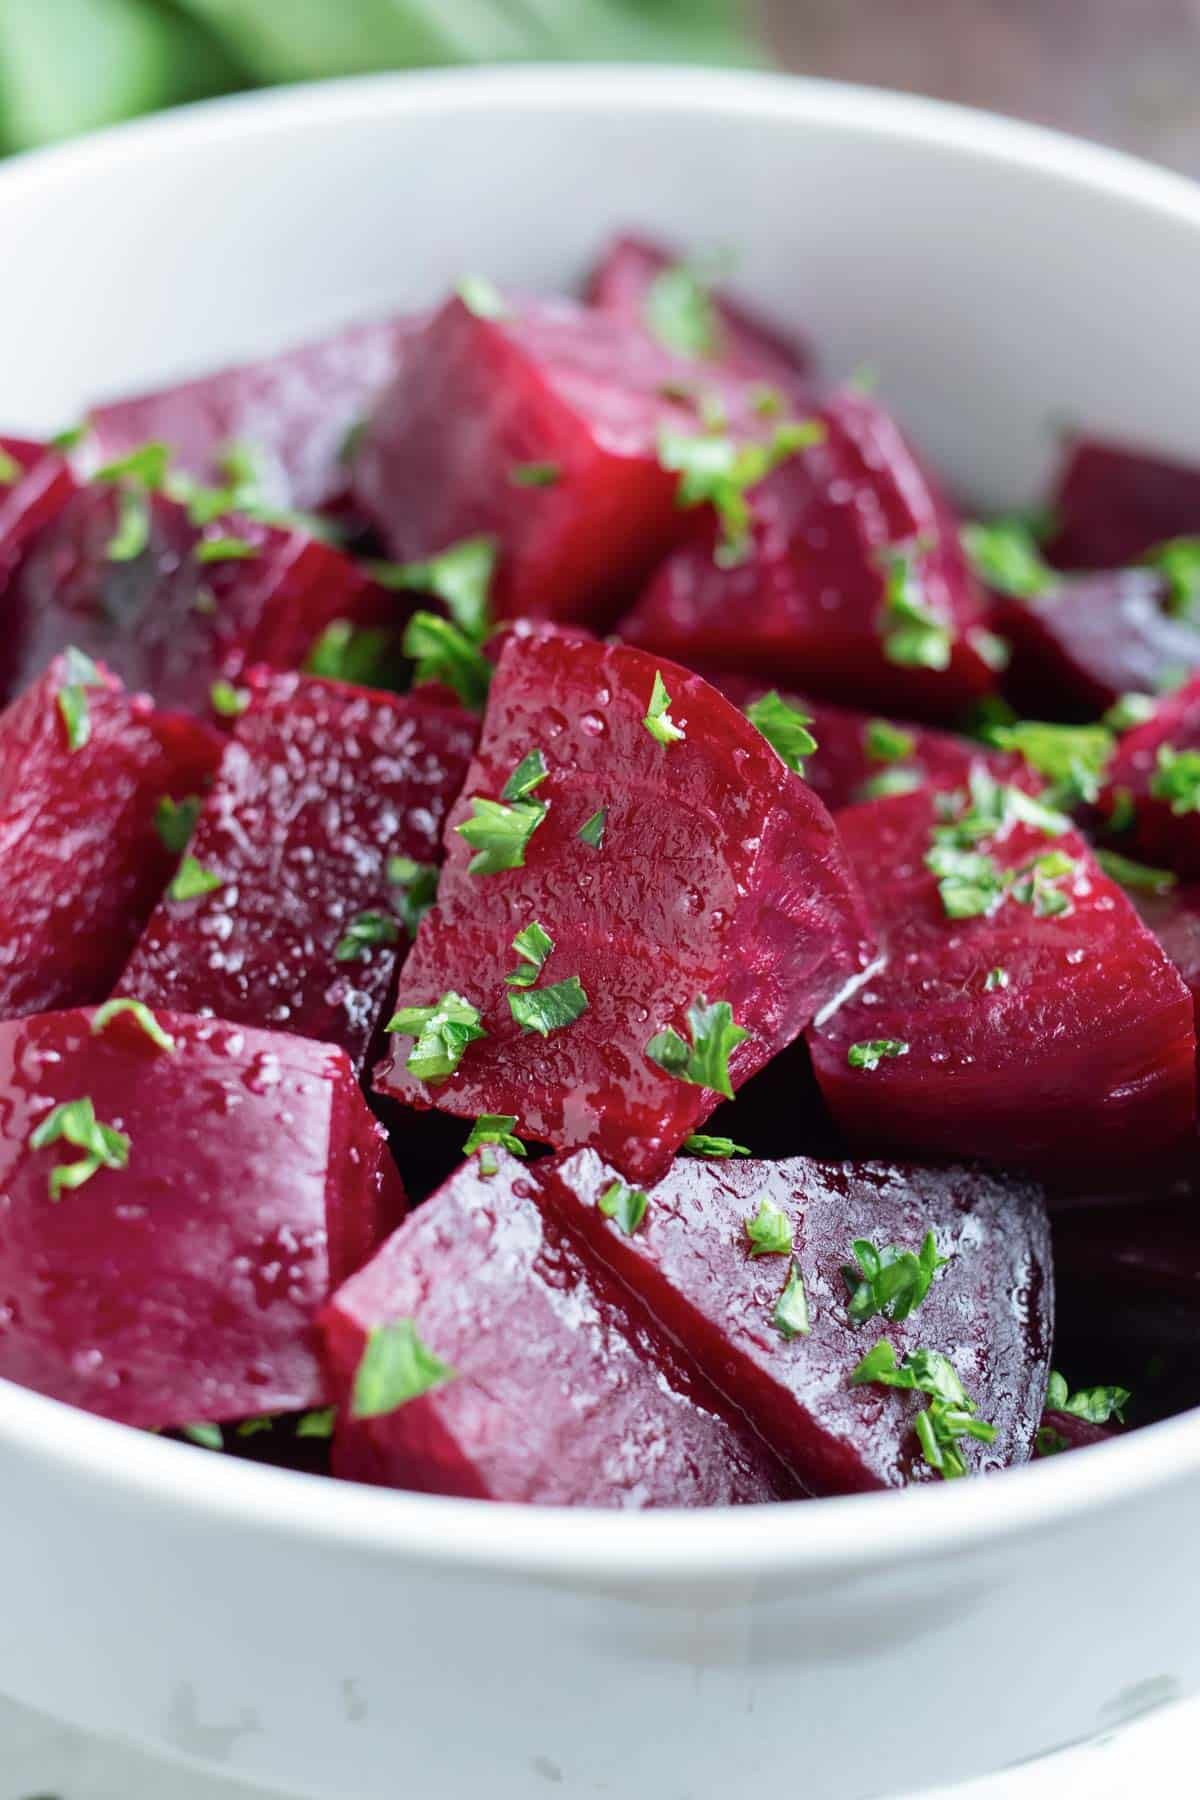 Tender beets are chopped after being boiled and peeled.